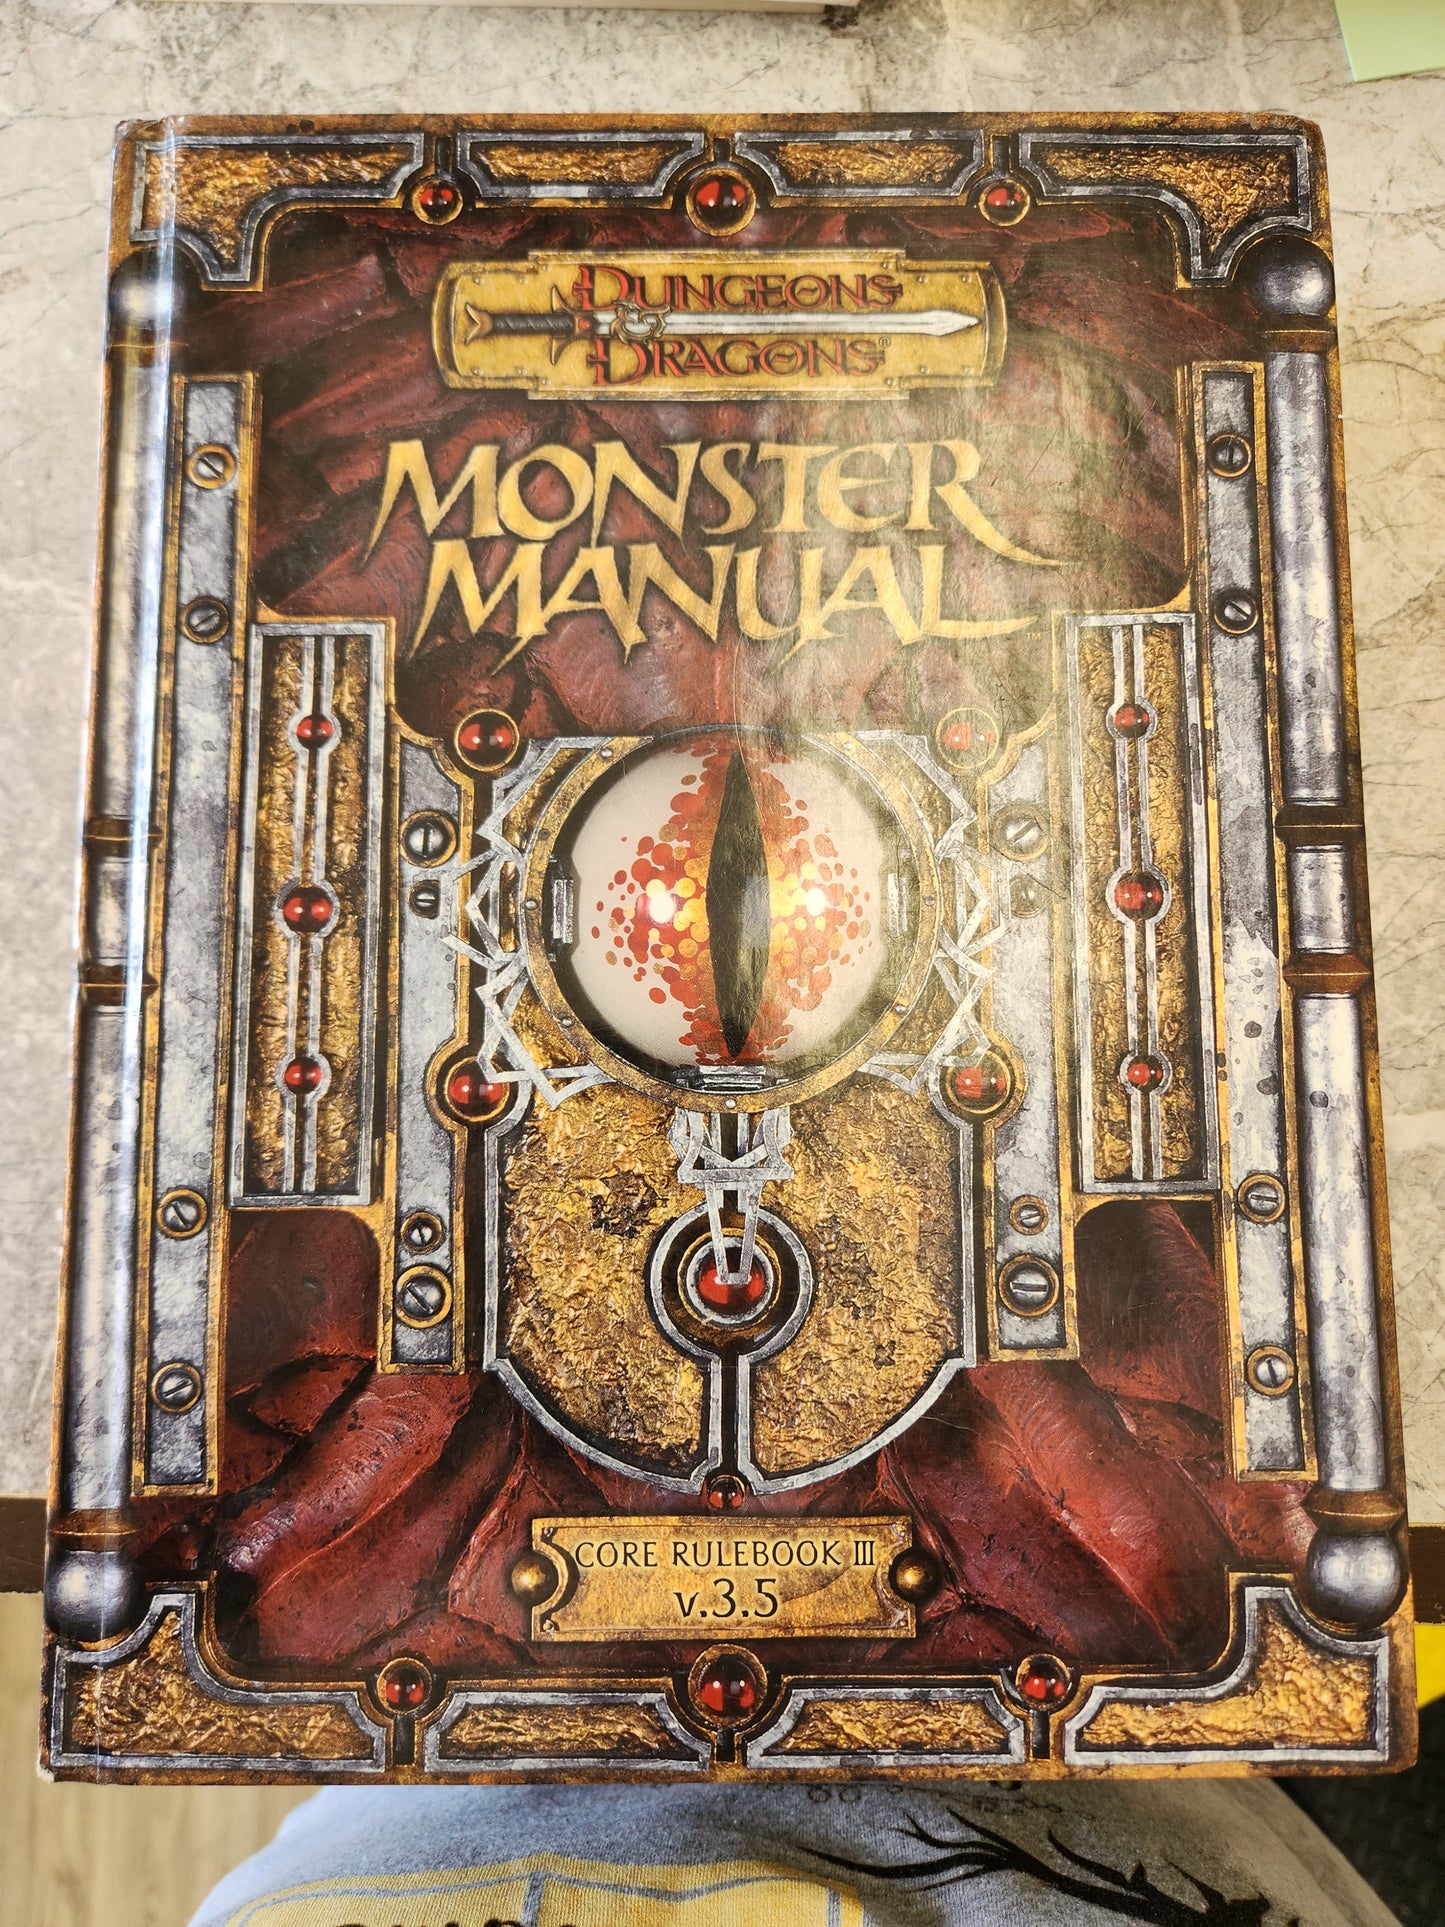 Monster Manual: Core Rulebook III v. 3.5 [Dungeons & Dragons d20 System]